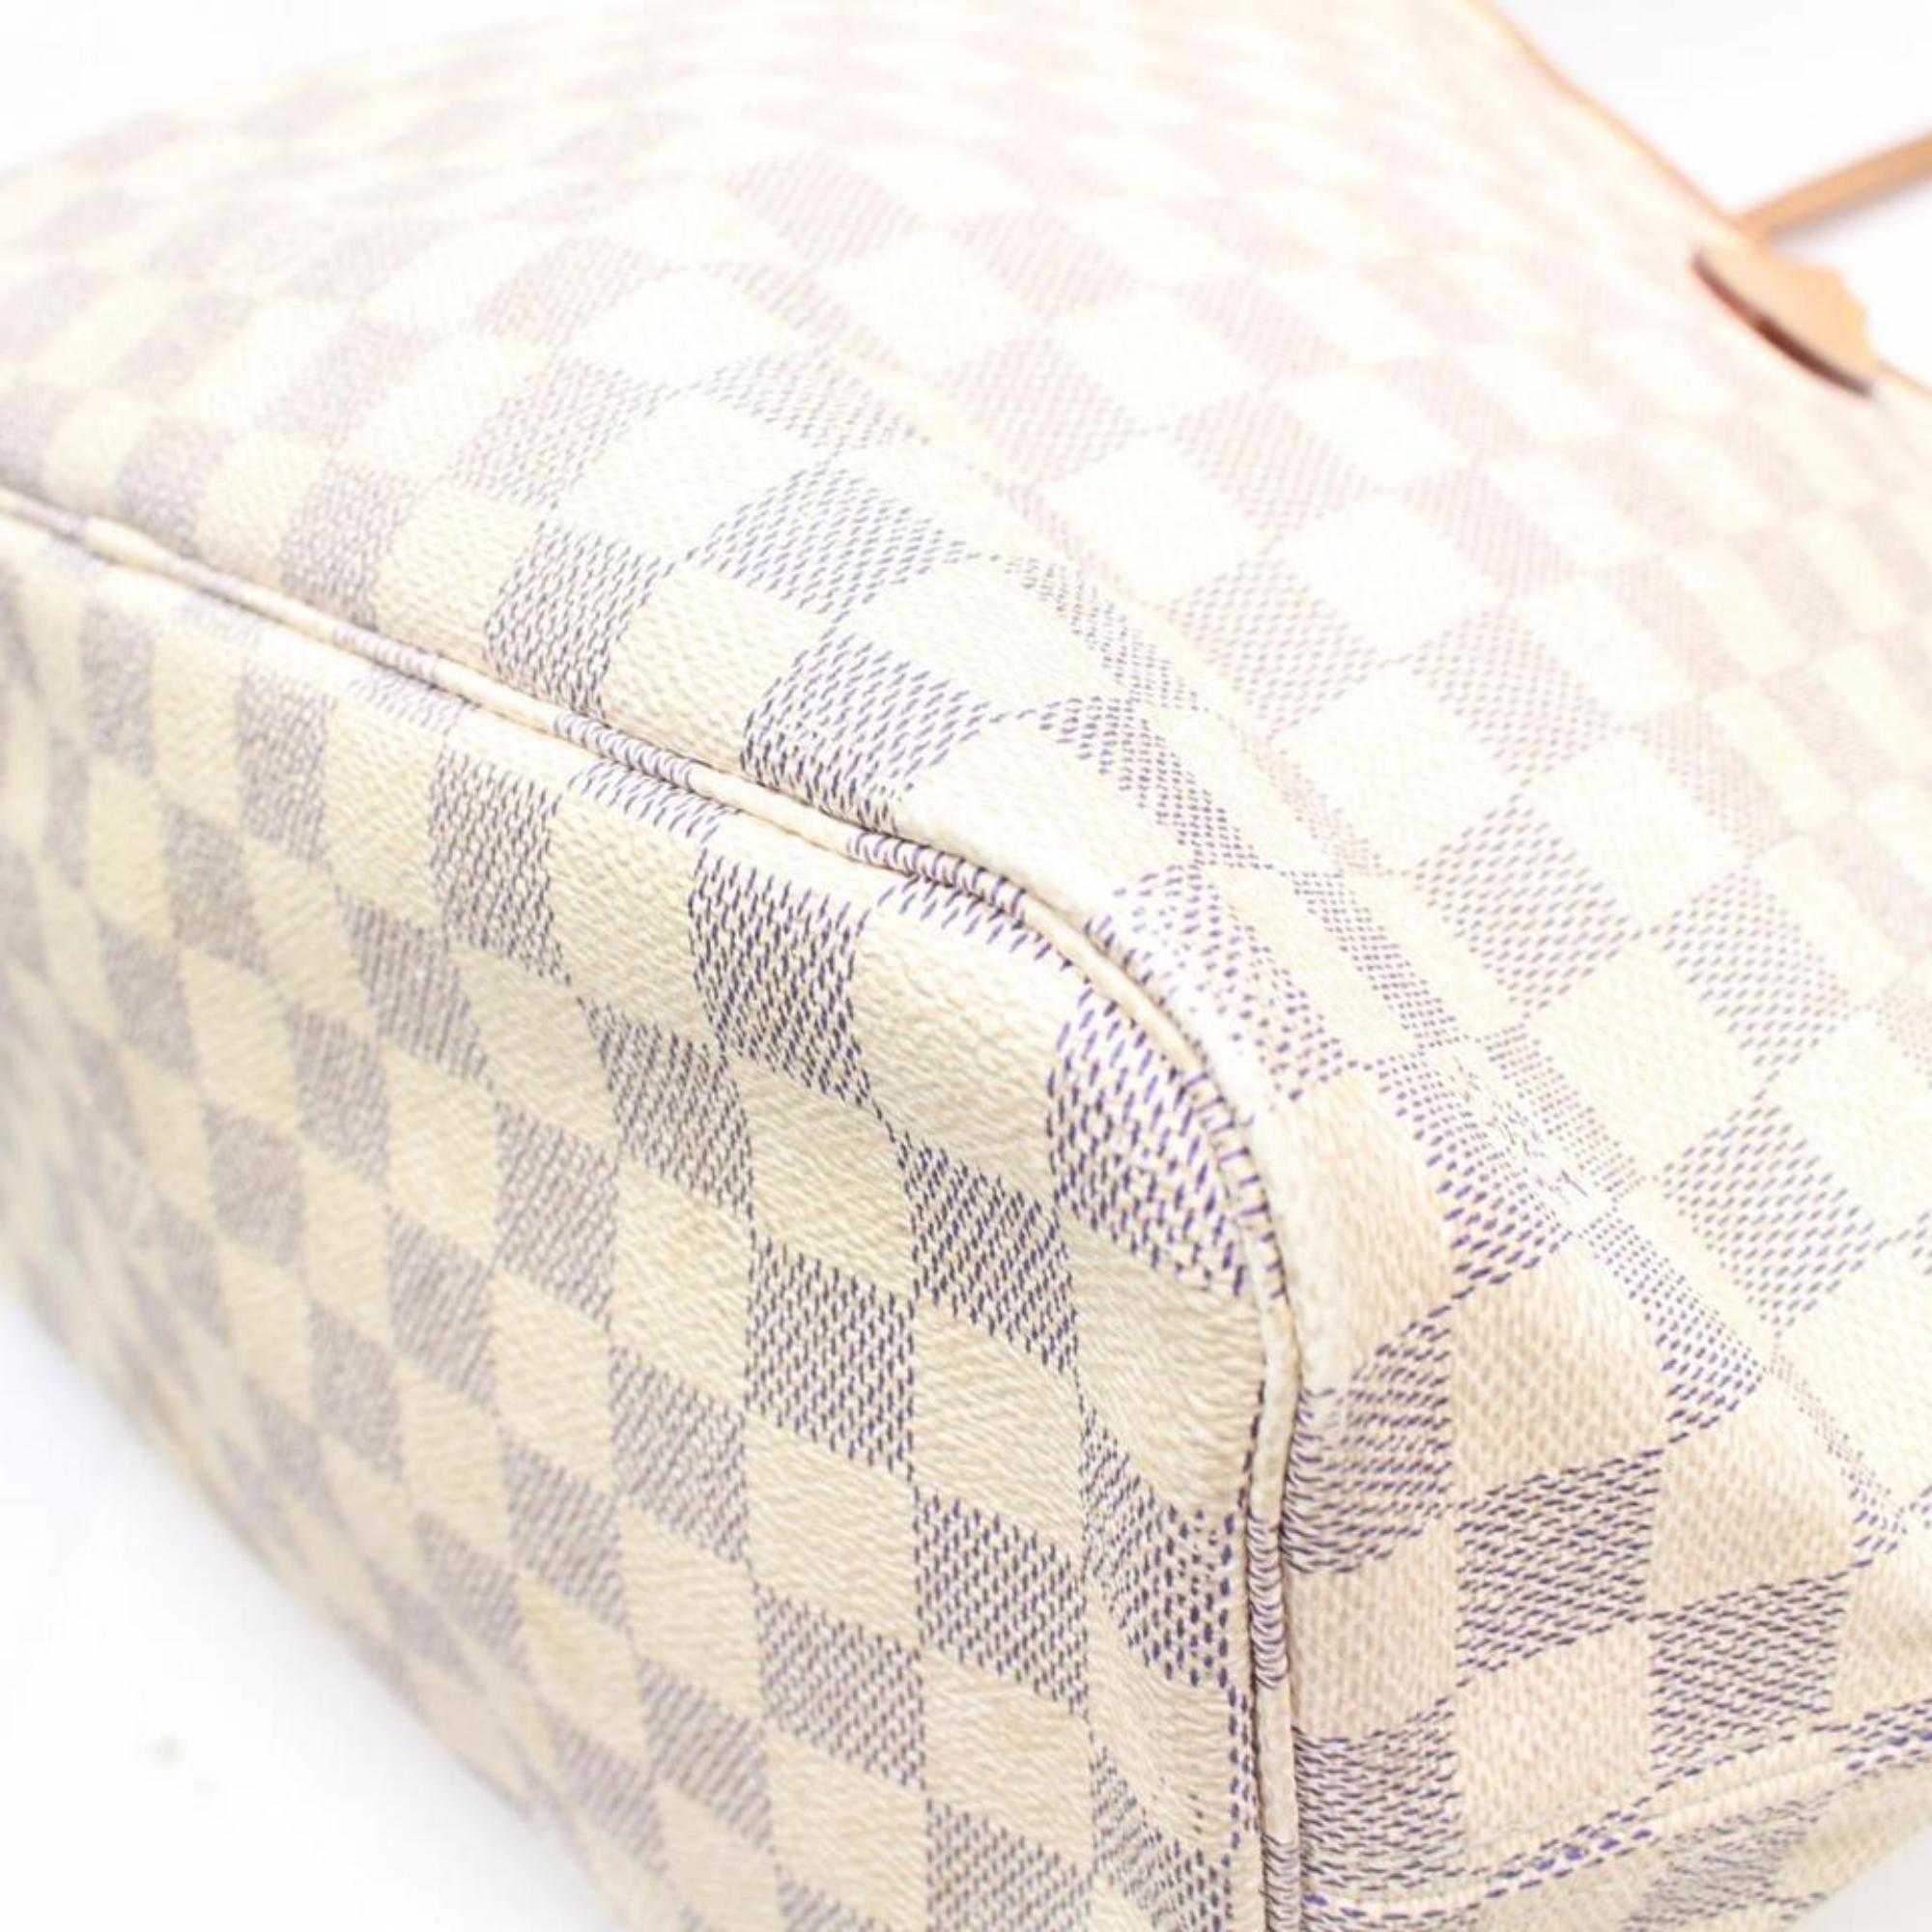 Louis Vuitton Neverfull Damier Azur Mm 869418 Whites Coated Canvas Tote For Sale 5